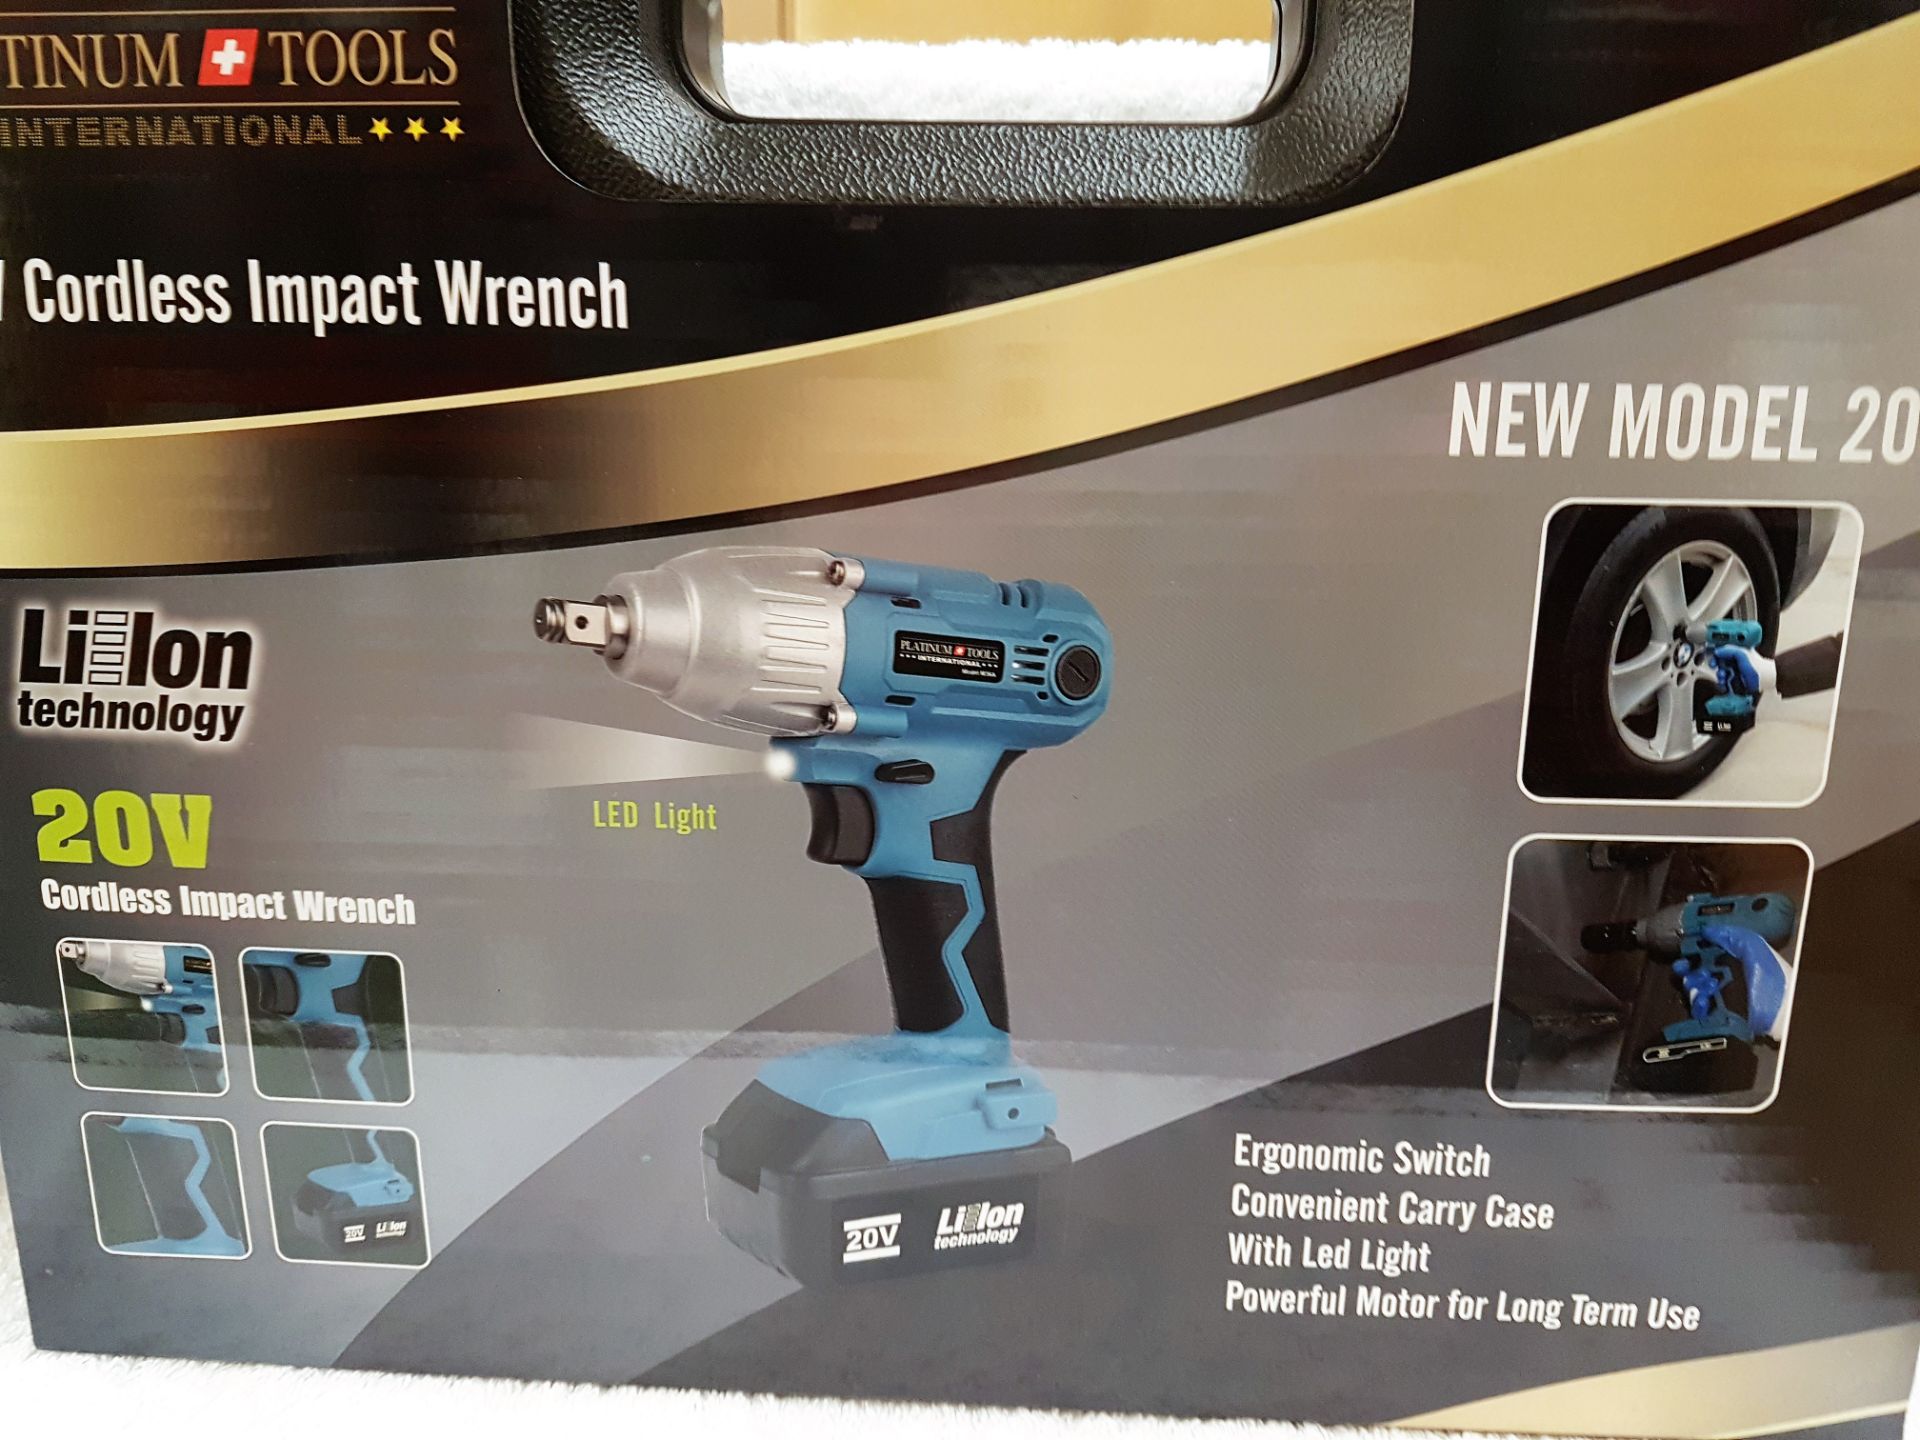 V Brand New 20v Cordless Impact Wrench M36A Including Extra Battery-Quick Charger-4 Sockets-LED